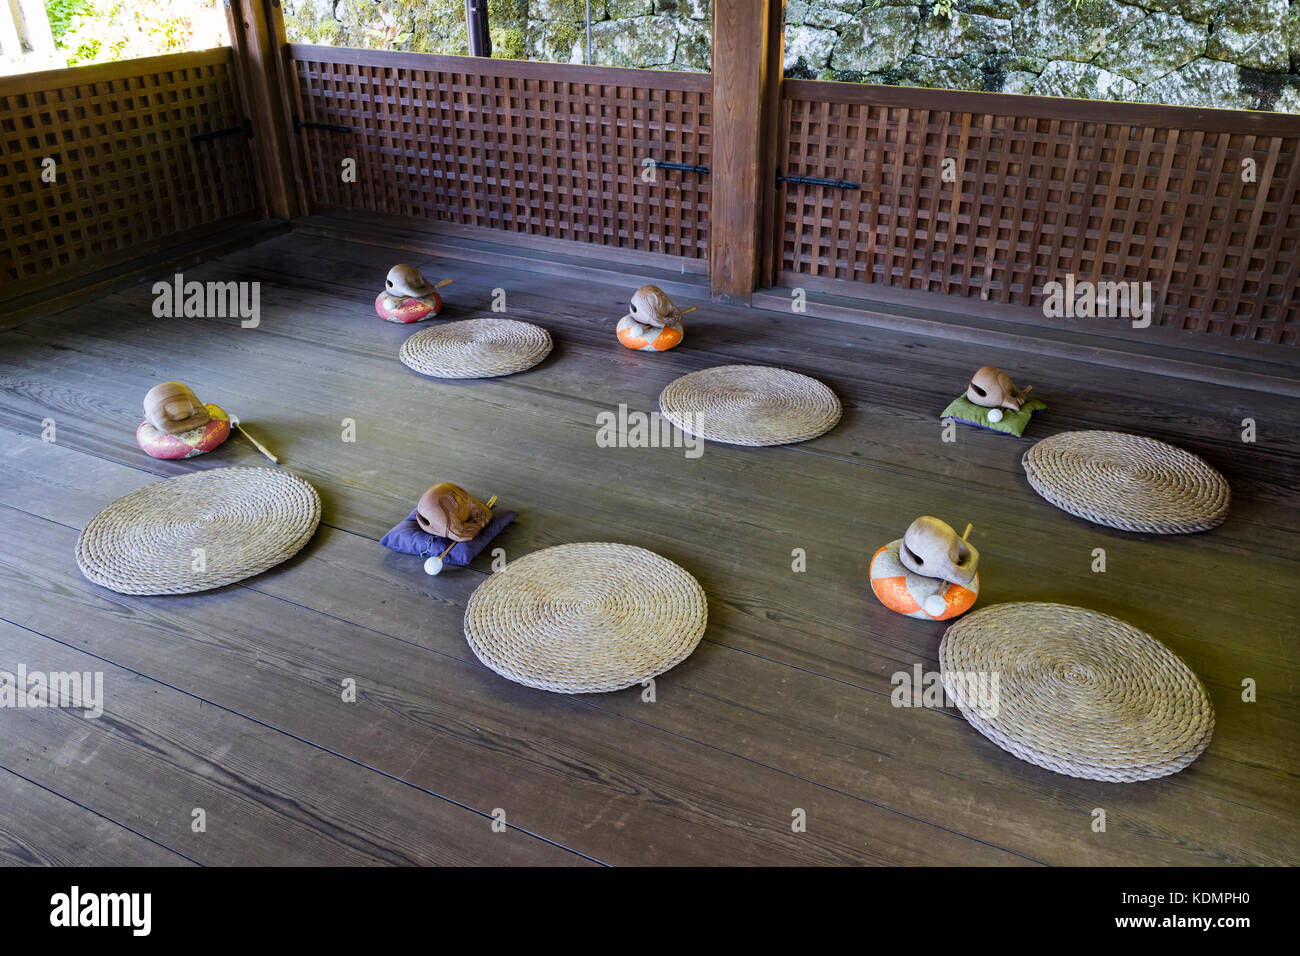 Kyoto, Japan - May 19, 2017: Room with traditional zen buddhist wooden fish gongs, Mokugyo and pillows to perform meditation Stock Photo